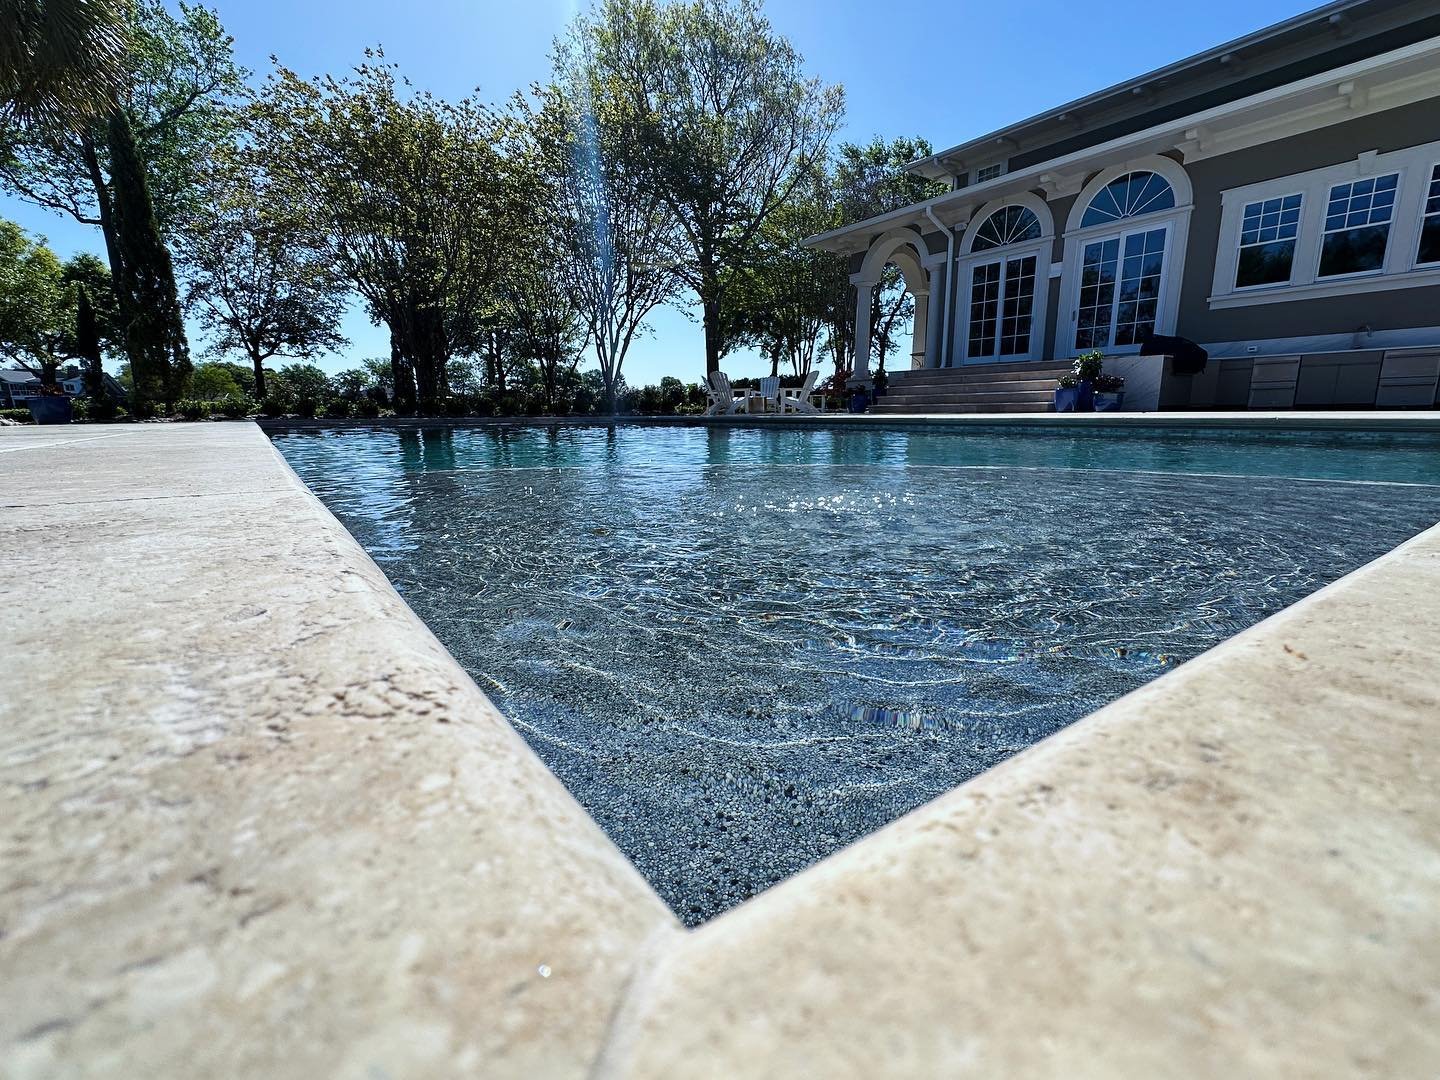 #Project929 28-Day NPC start-up time. Can&rsquo;t wait for you to see the features on this one. 

#gunite
#gunitepools
#waterfrontpool
#oceanfrontpool
#luxurypool
#gunitepoolconstruction
#wrightsvillebeach
#wrightsvillebeachnc
#poolconstruction #pool